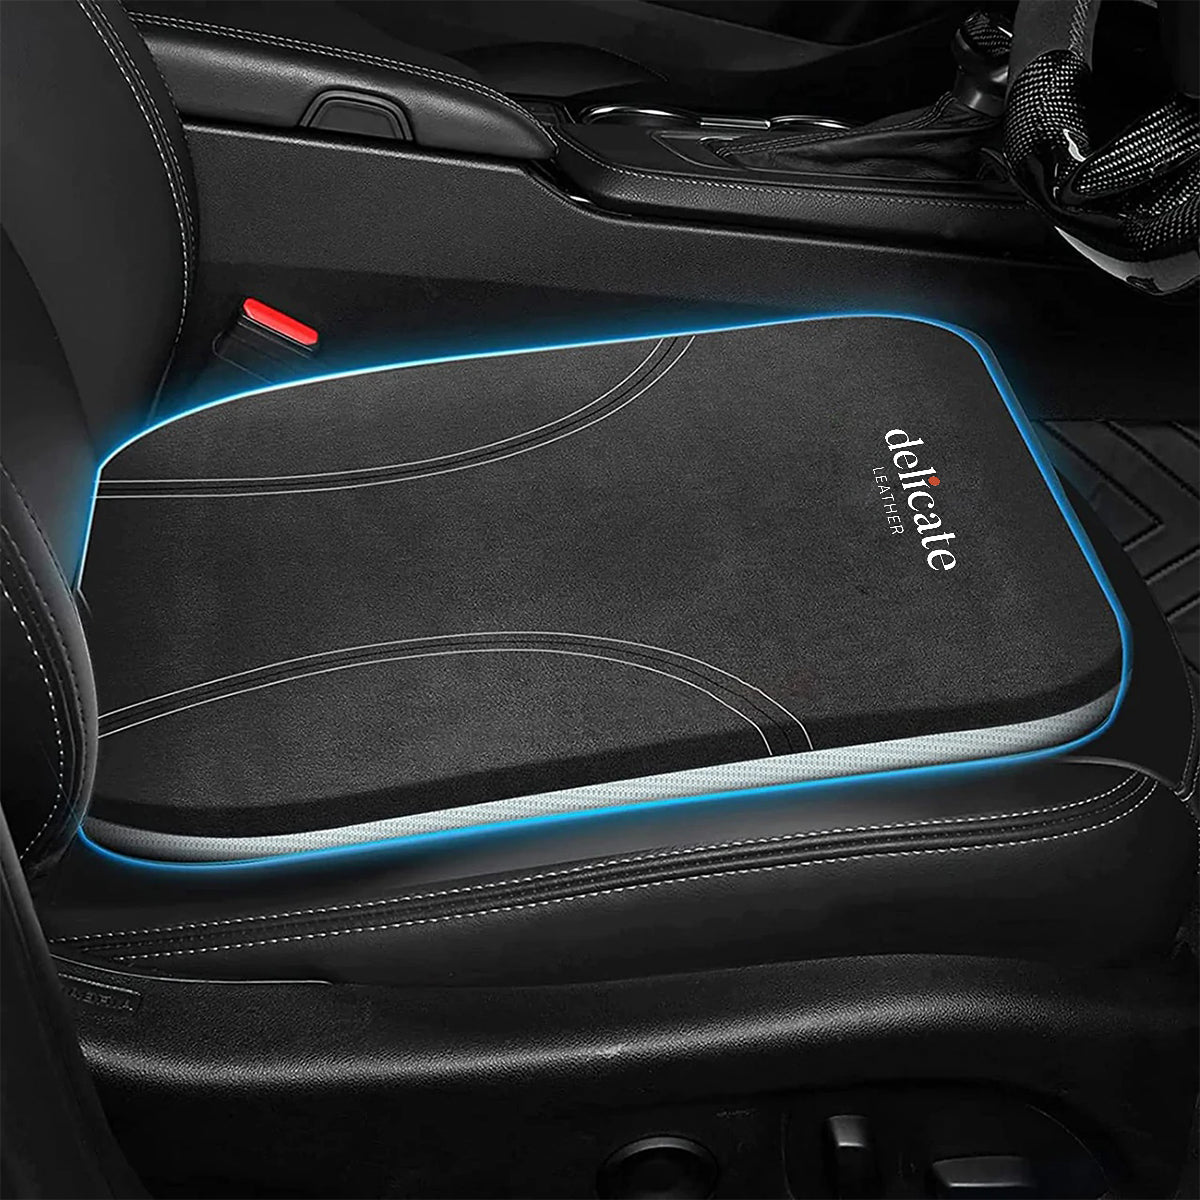 Jaguar Car Seat Cushion: Enhance Comfort and Support for Your Drive